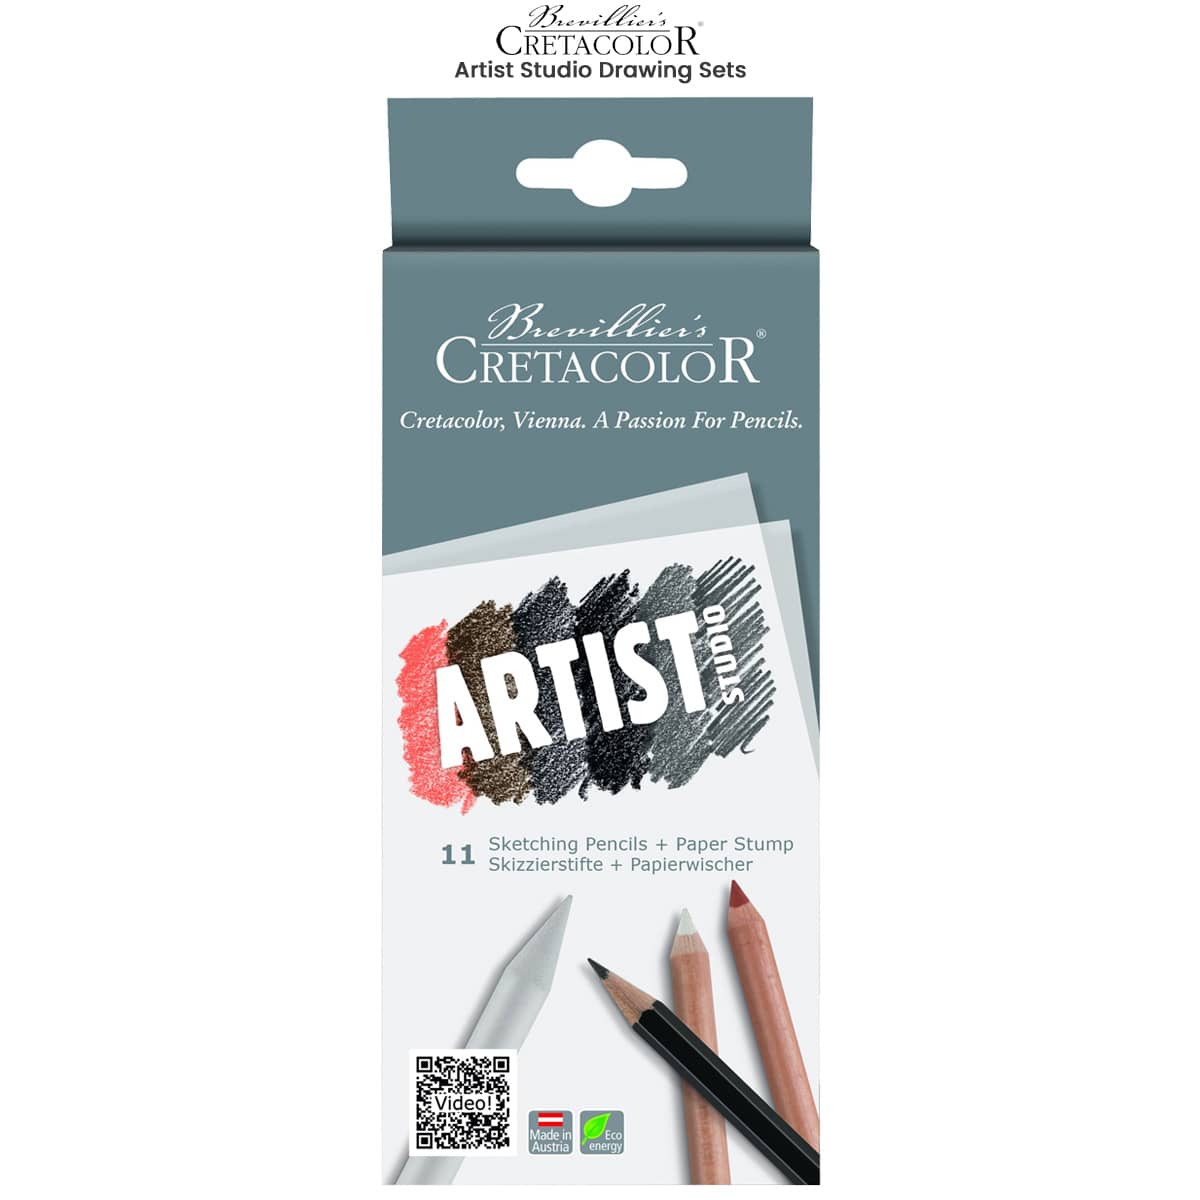 Best Charcoal Sketch Sets for Drawing –